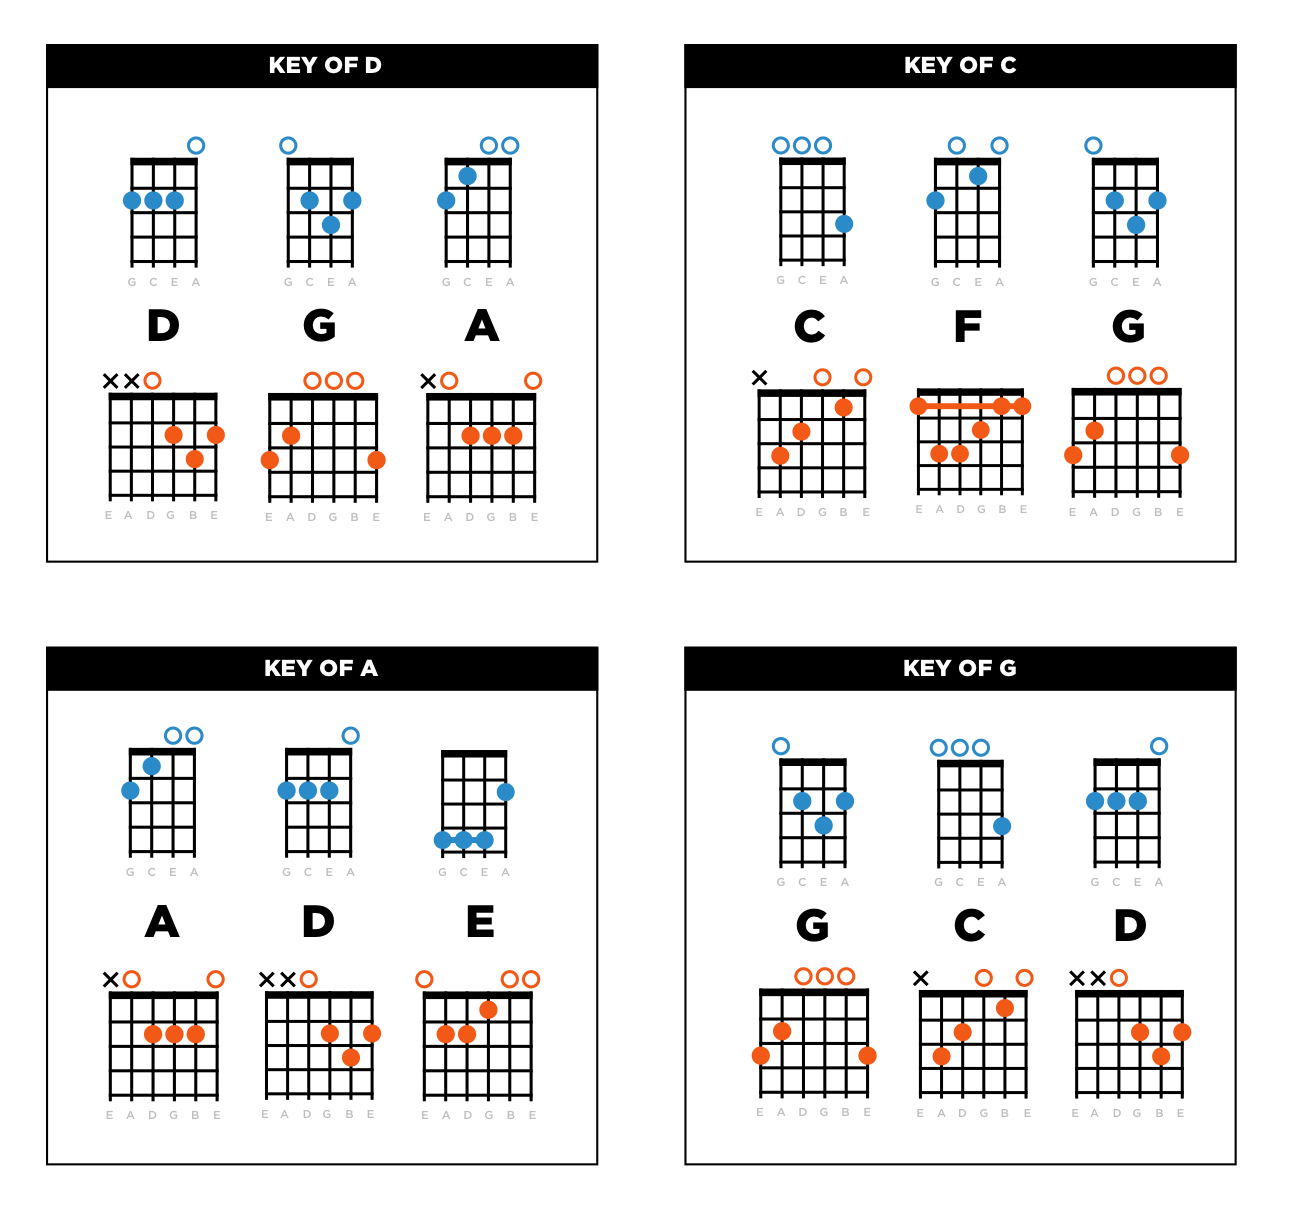 Ukulele Chord Chart: All The Chords You Need to Play Popular Songs